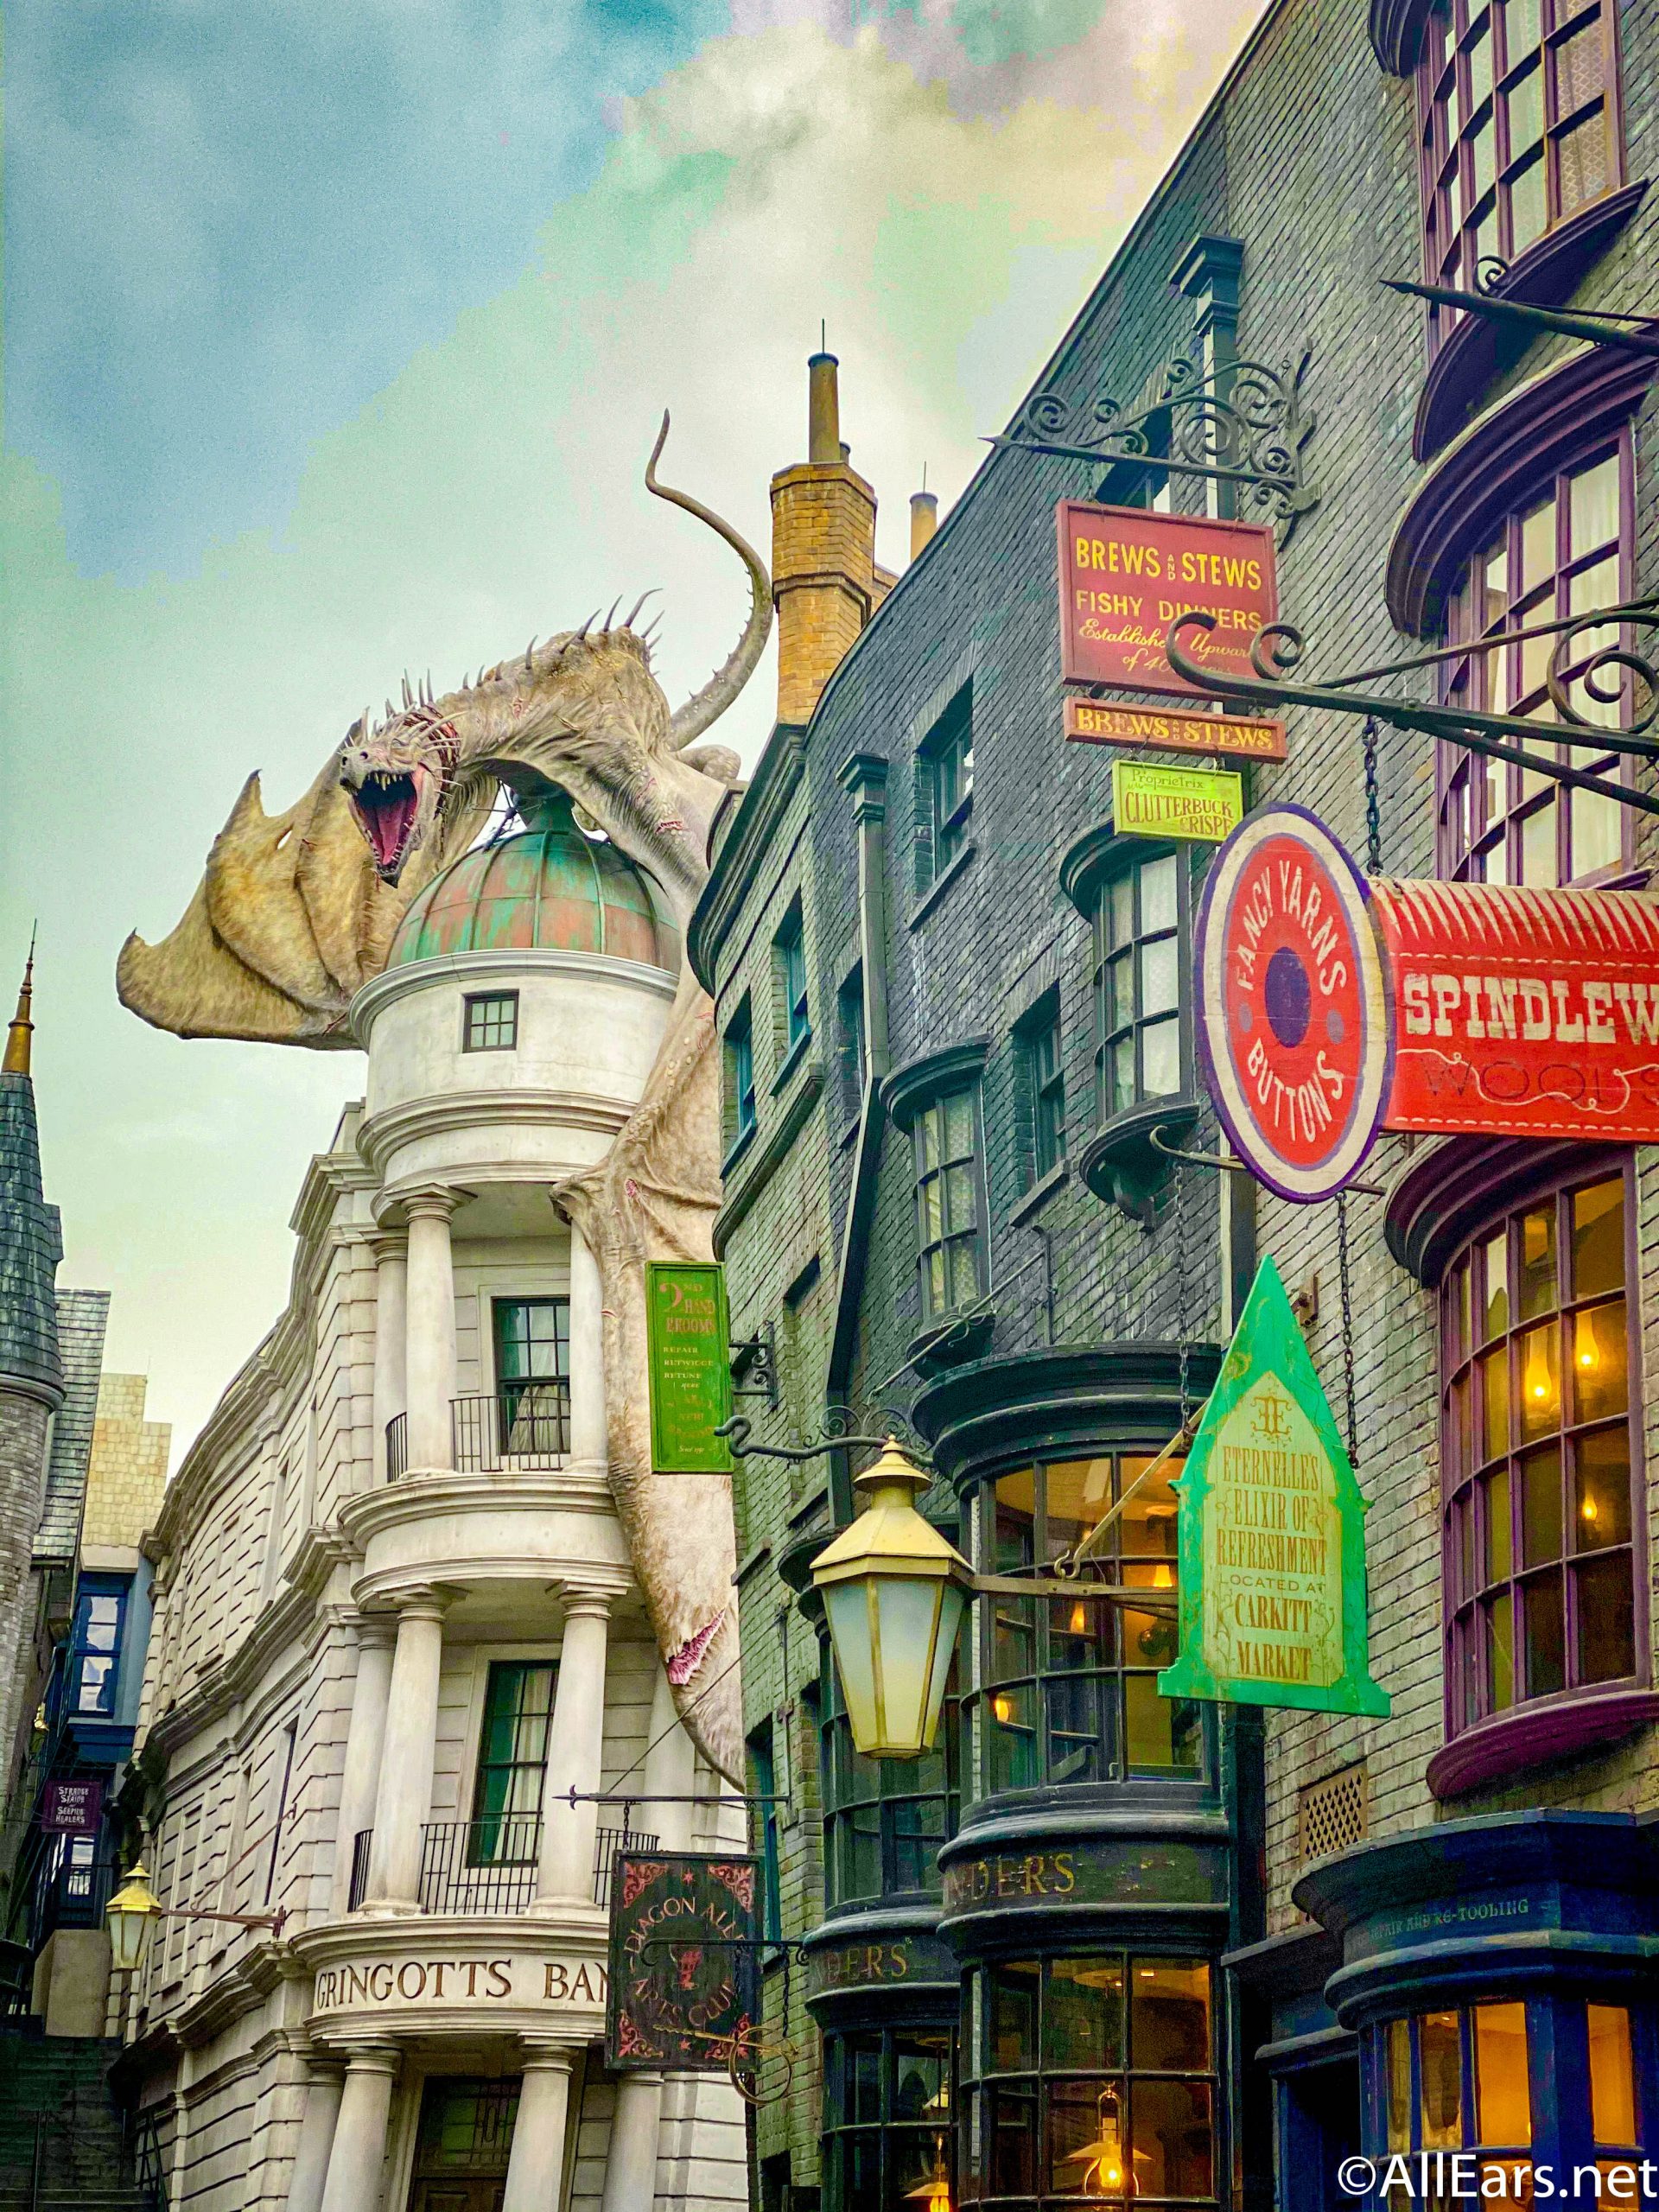 Its happening inside your head  Harry potter poster Harry potter  wallpaper Harry potter diagon alley